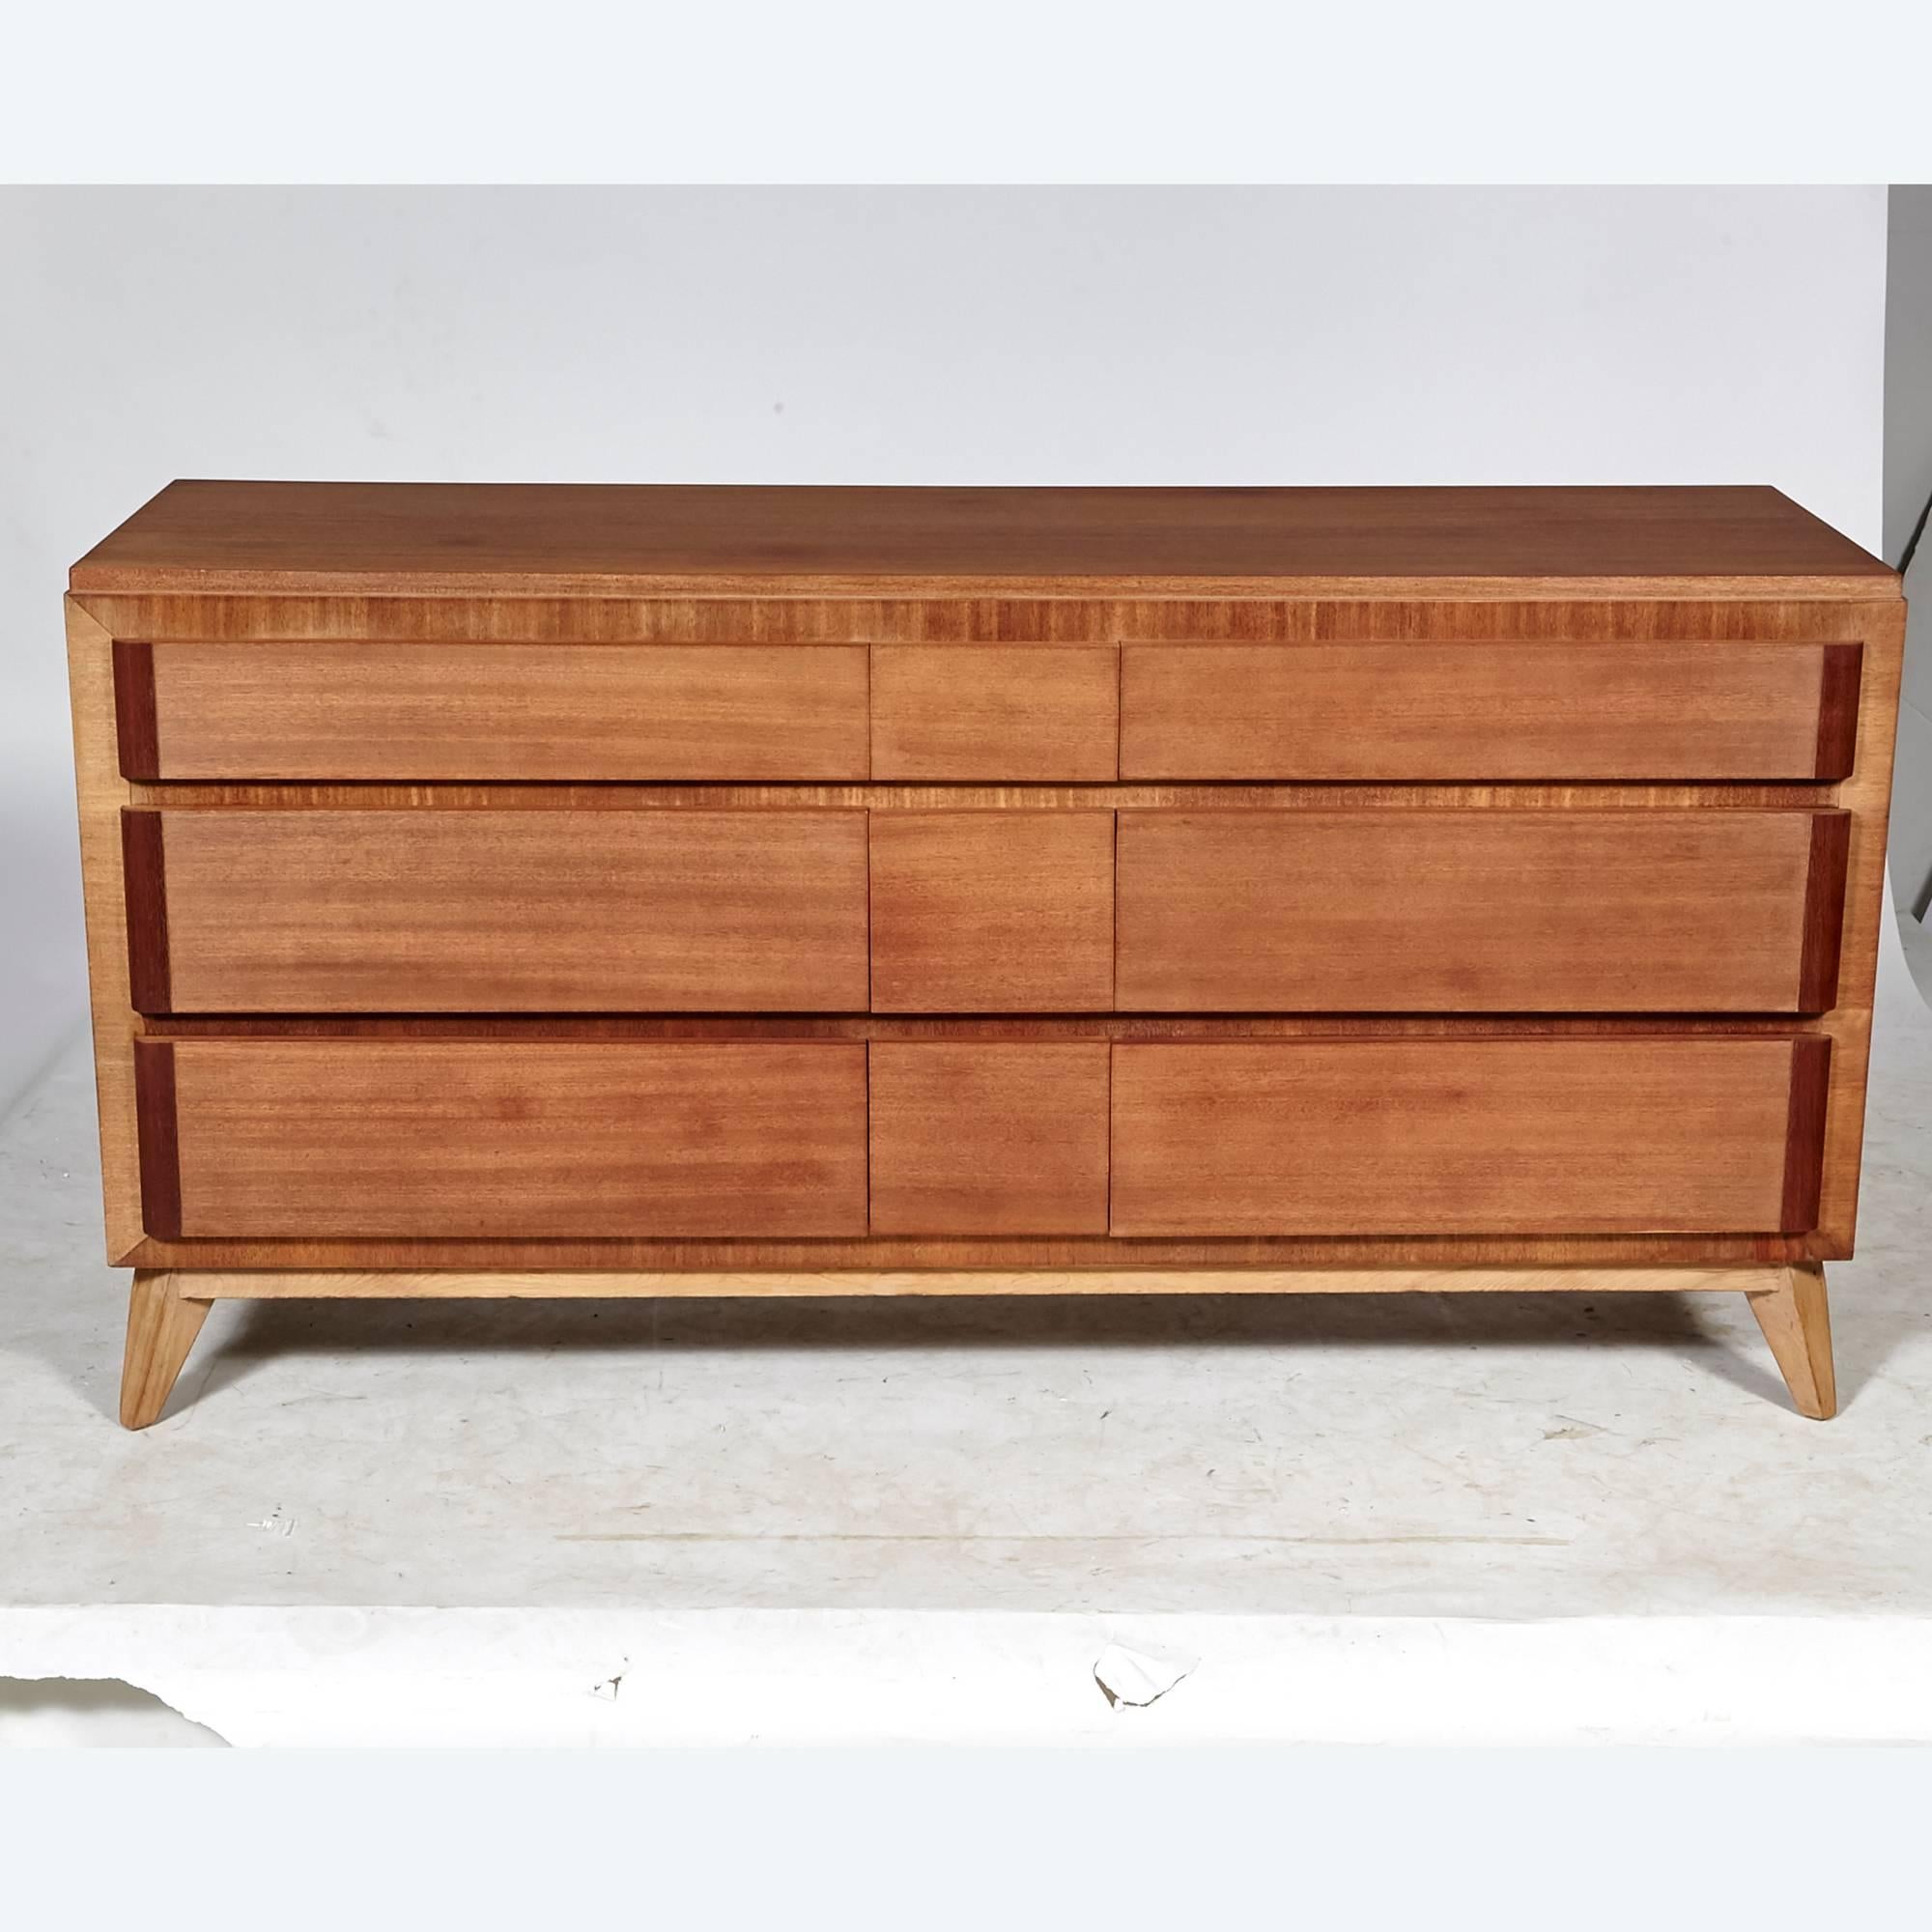 Vintage Mid-Century Modern low chest of drawers designed by Eliel Saarinen for Rway Furniture Co, circa late 1940s-early 1950s. The dresser is in mahogany and maple wood with nine drawers for storage and angled legs. In refinished condition. Marked